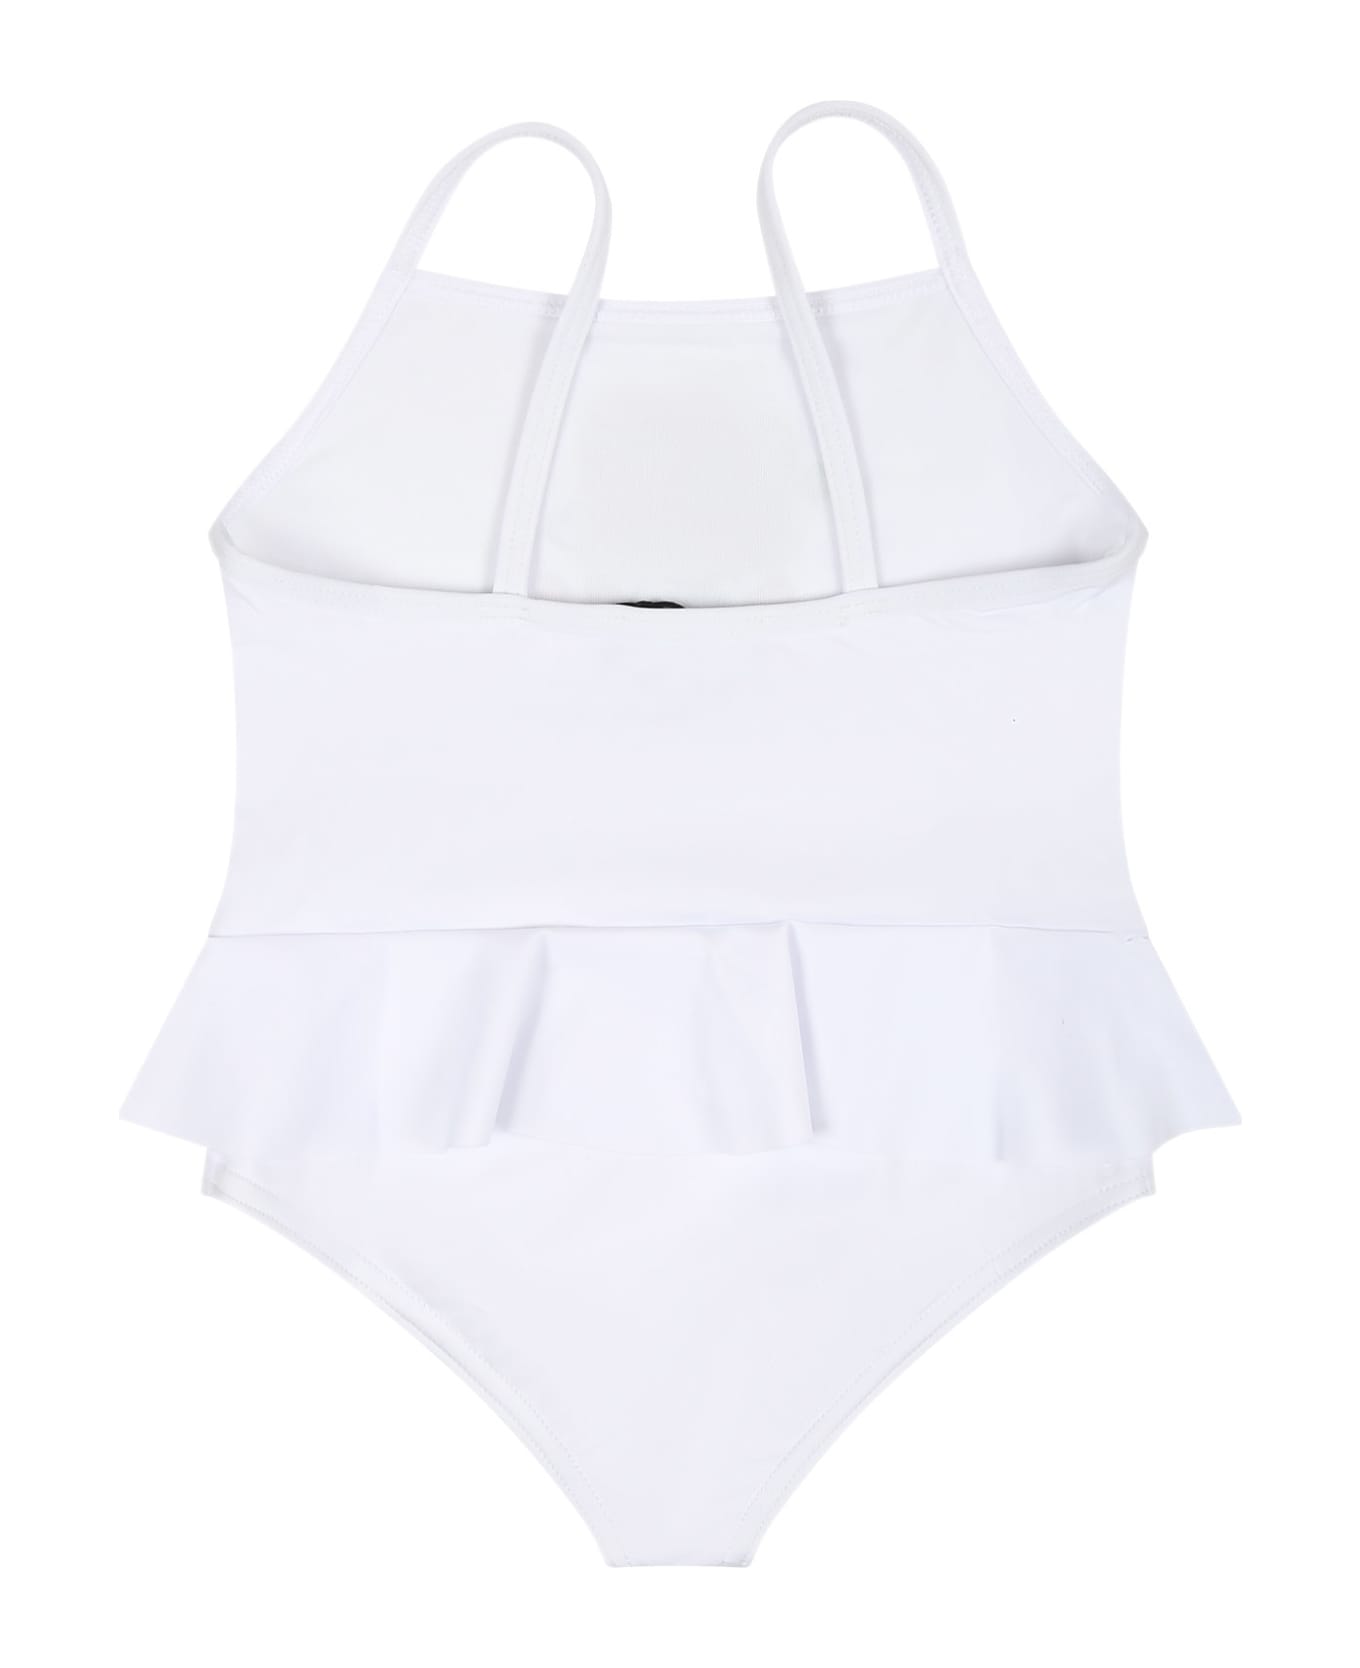 Moschino White Swimsuit For Baby Girl With Teddy Bear And Logo - White